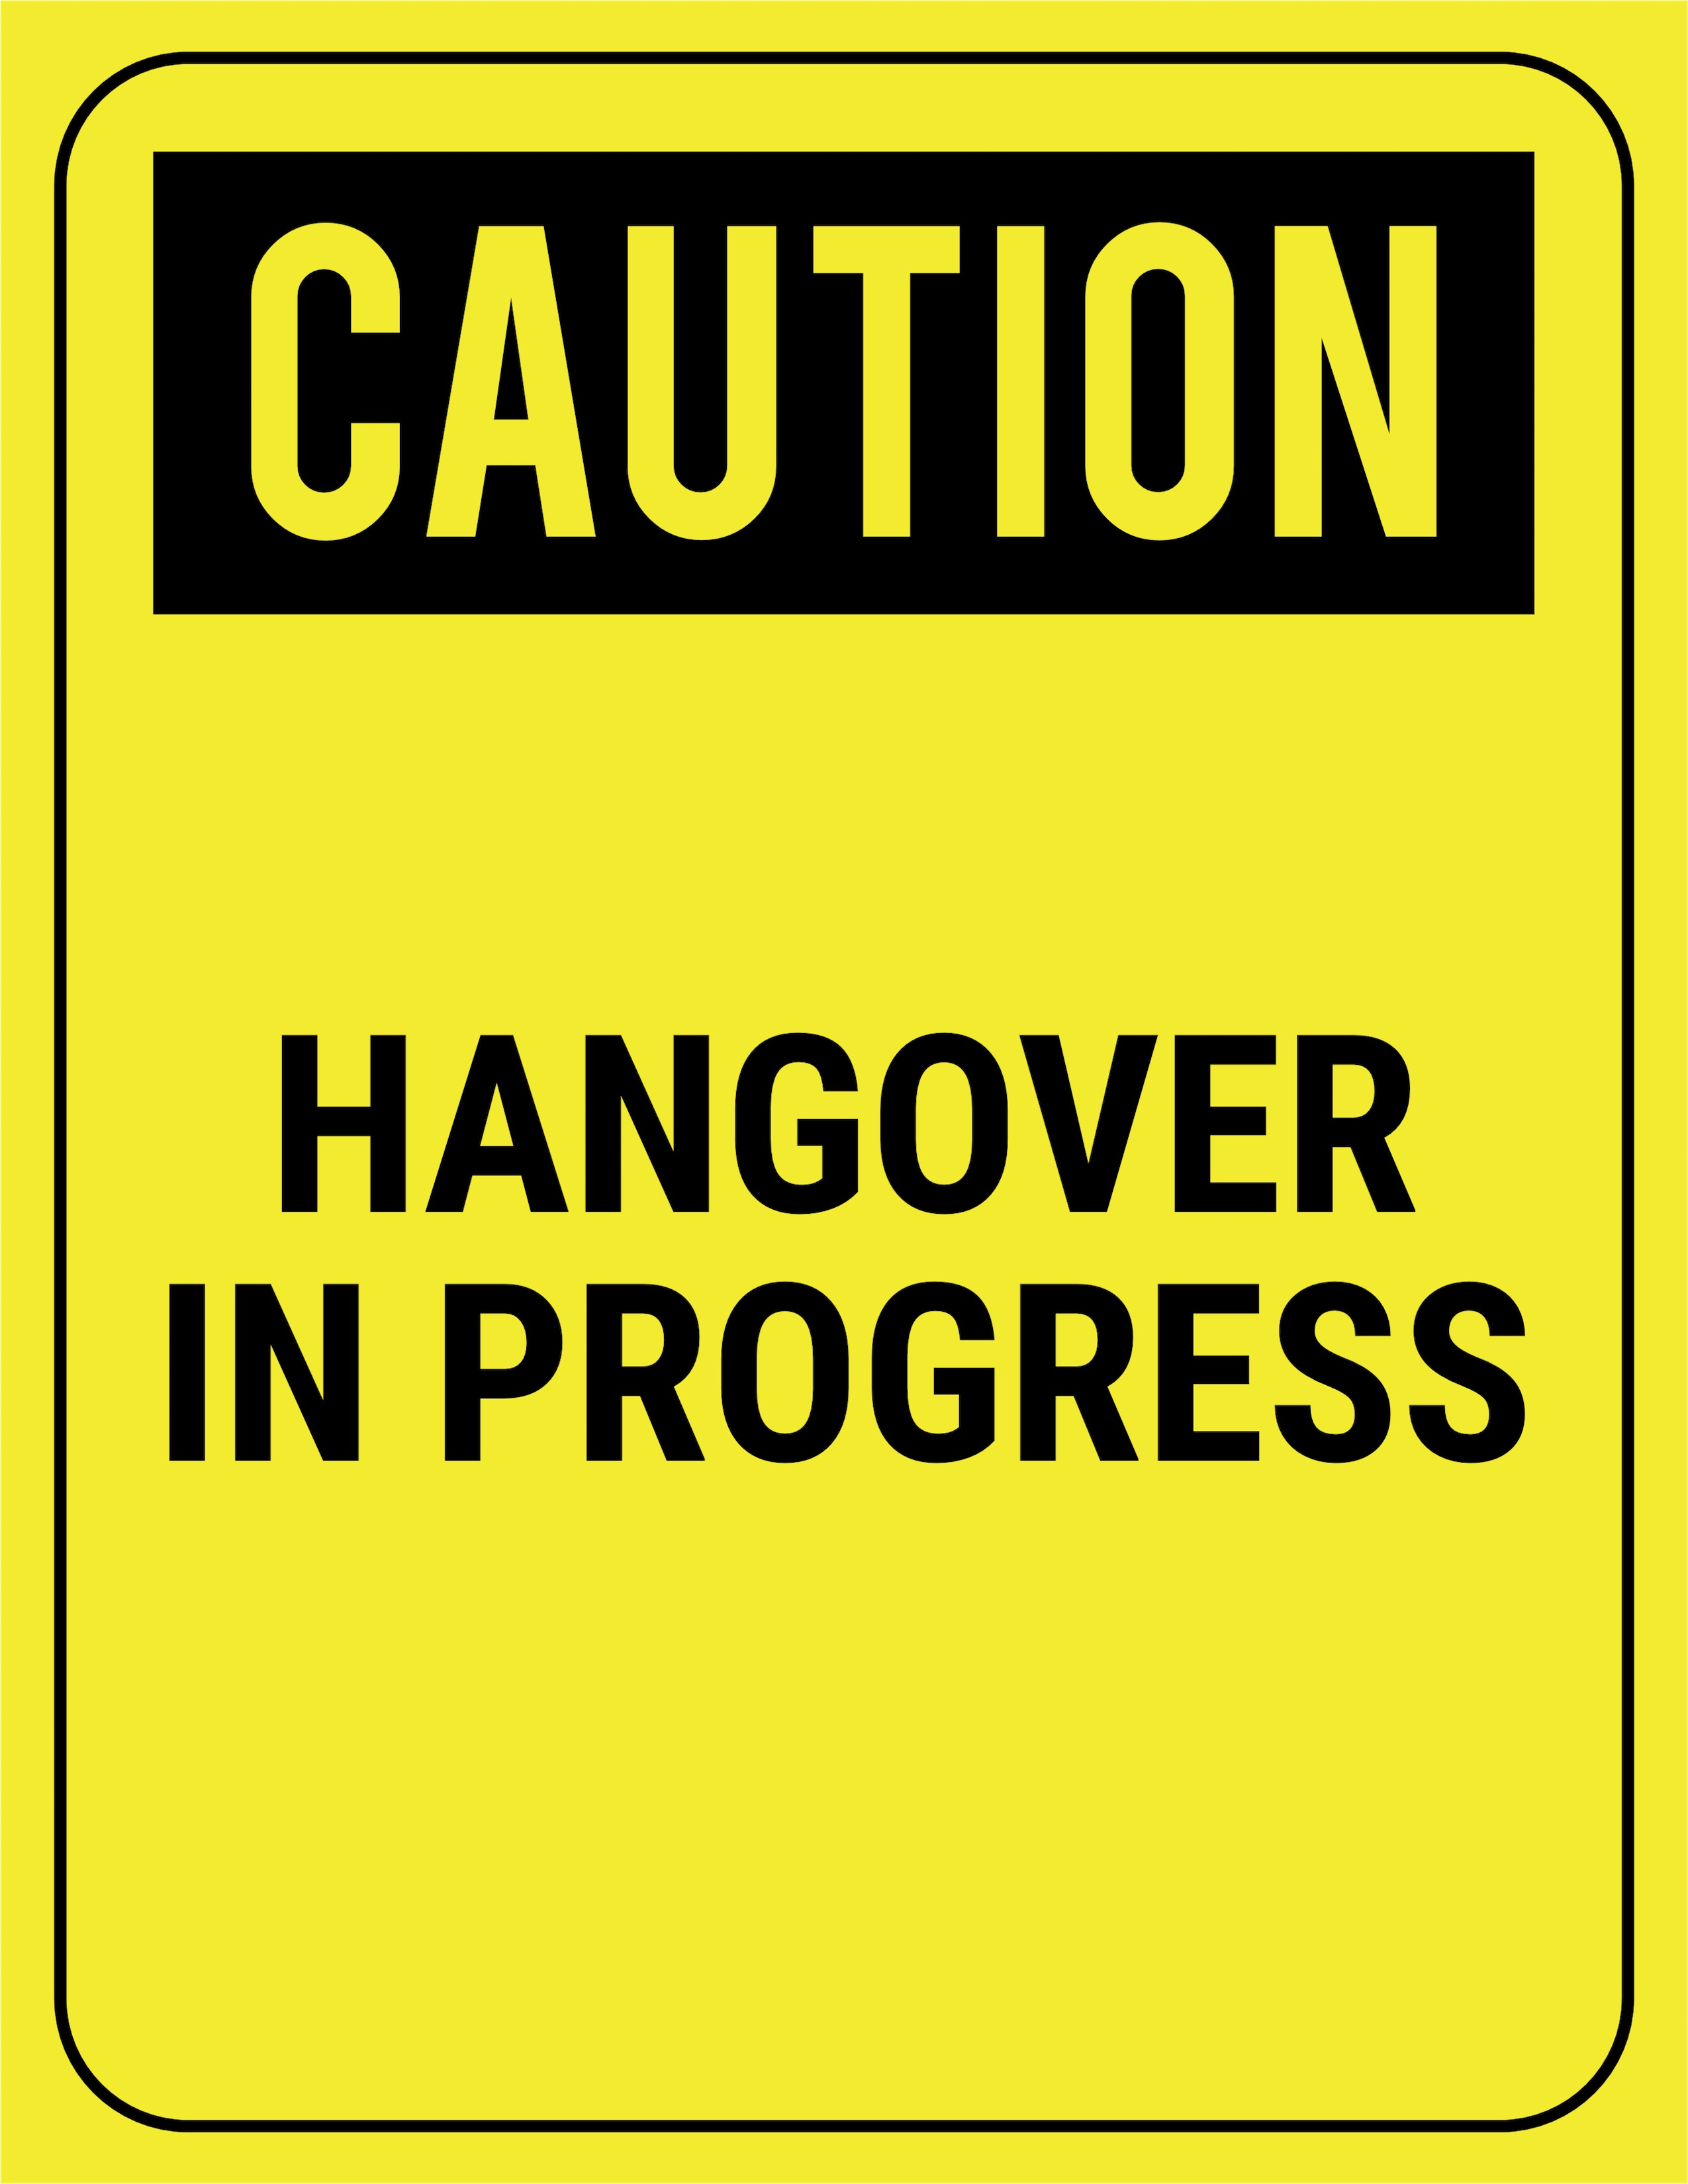 Funny Safety Signs To Download And Print - Free Printable Funny Signs